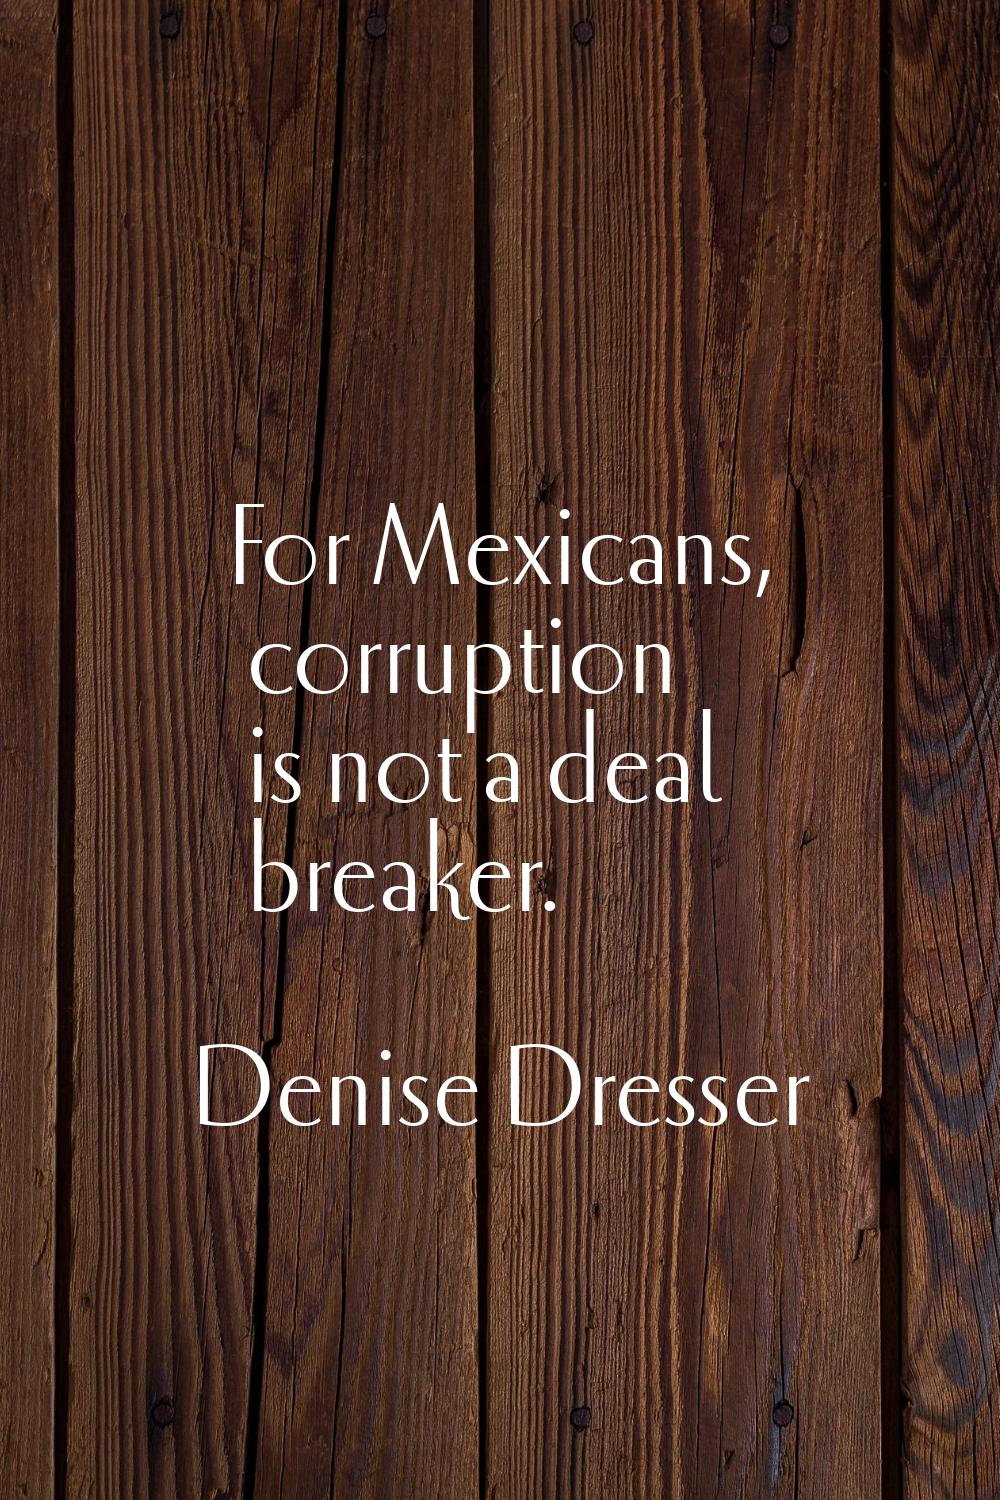 For Mexicans, corruption is not a deal breaker.